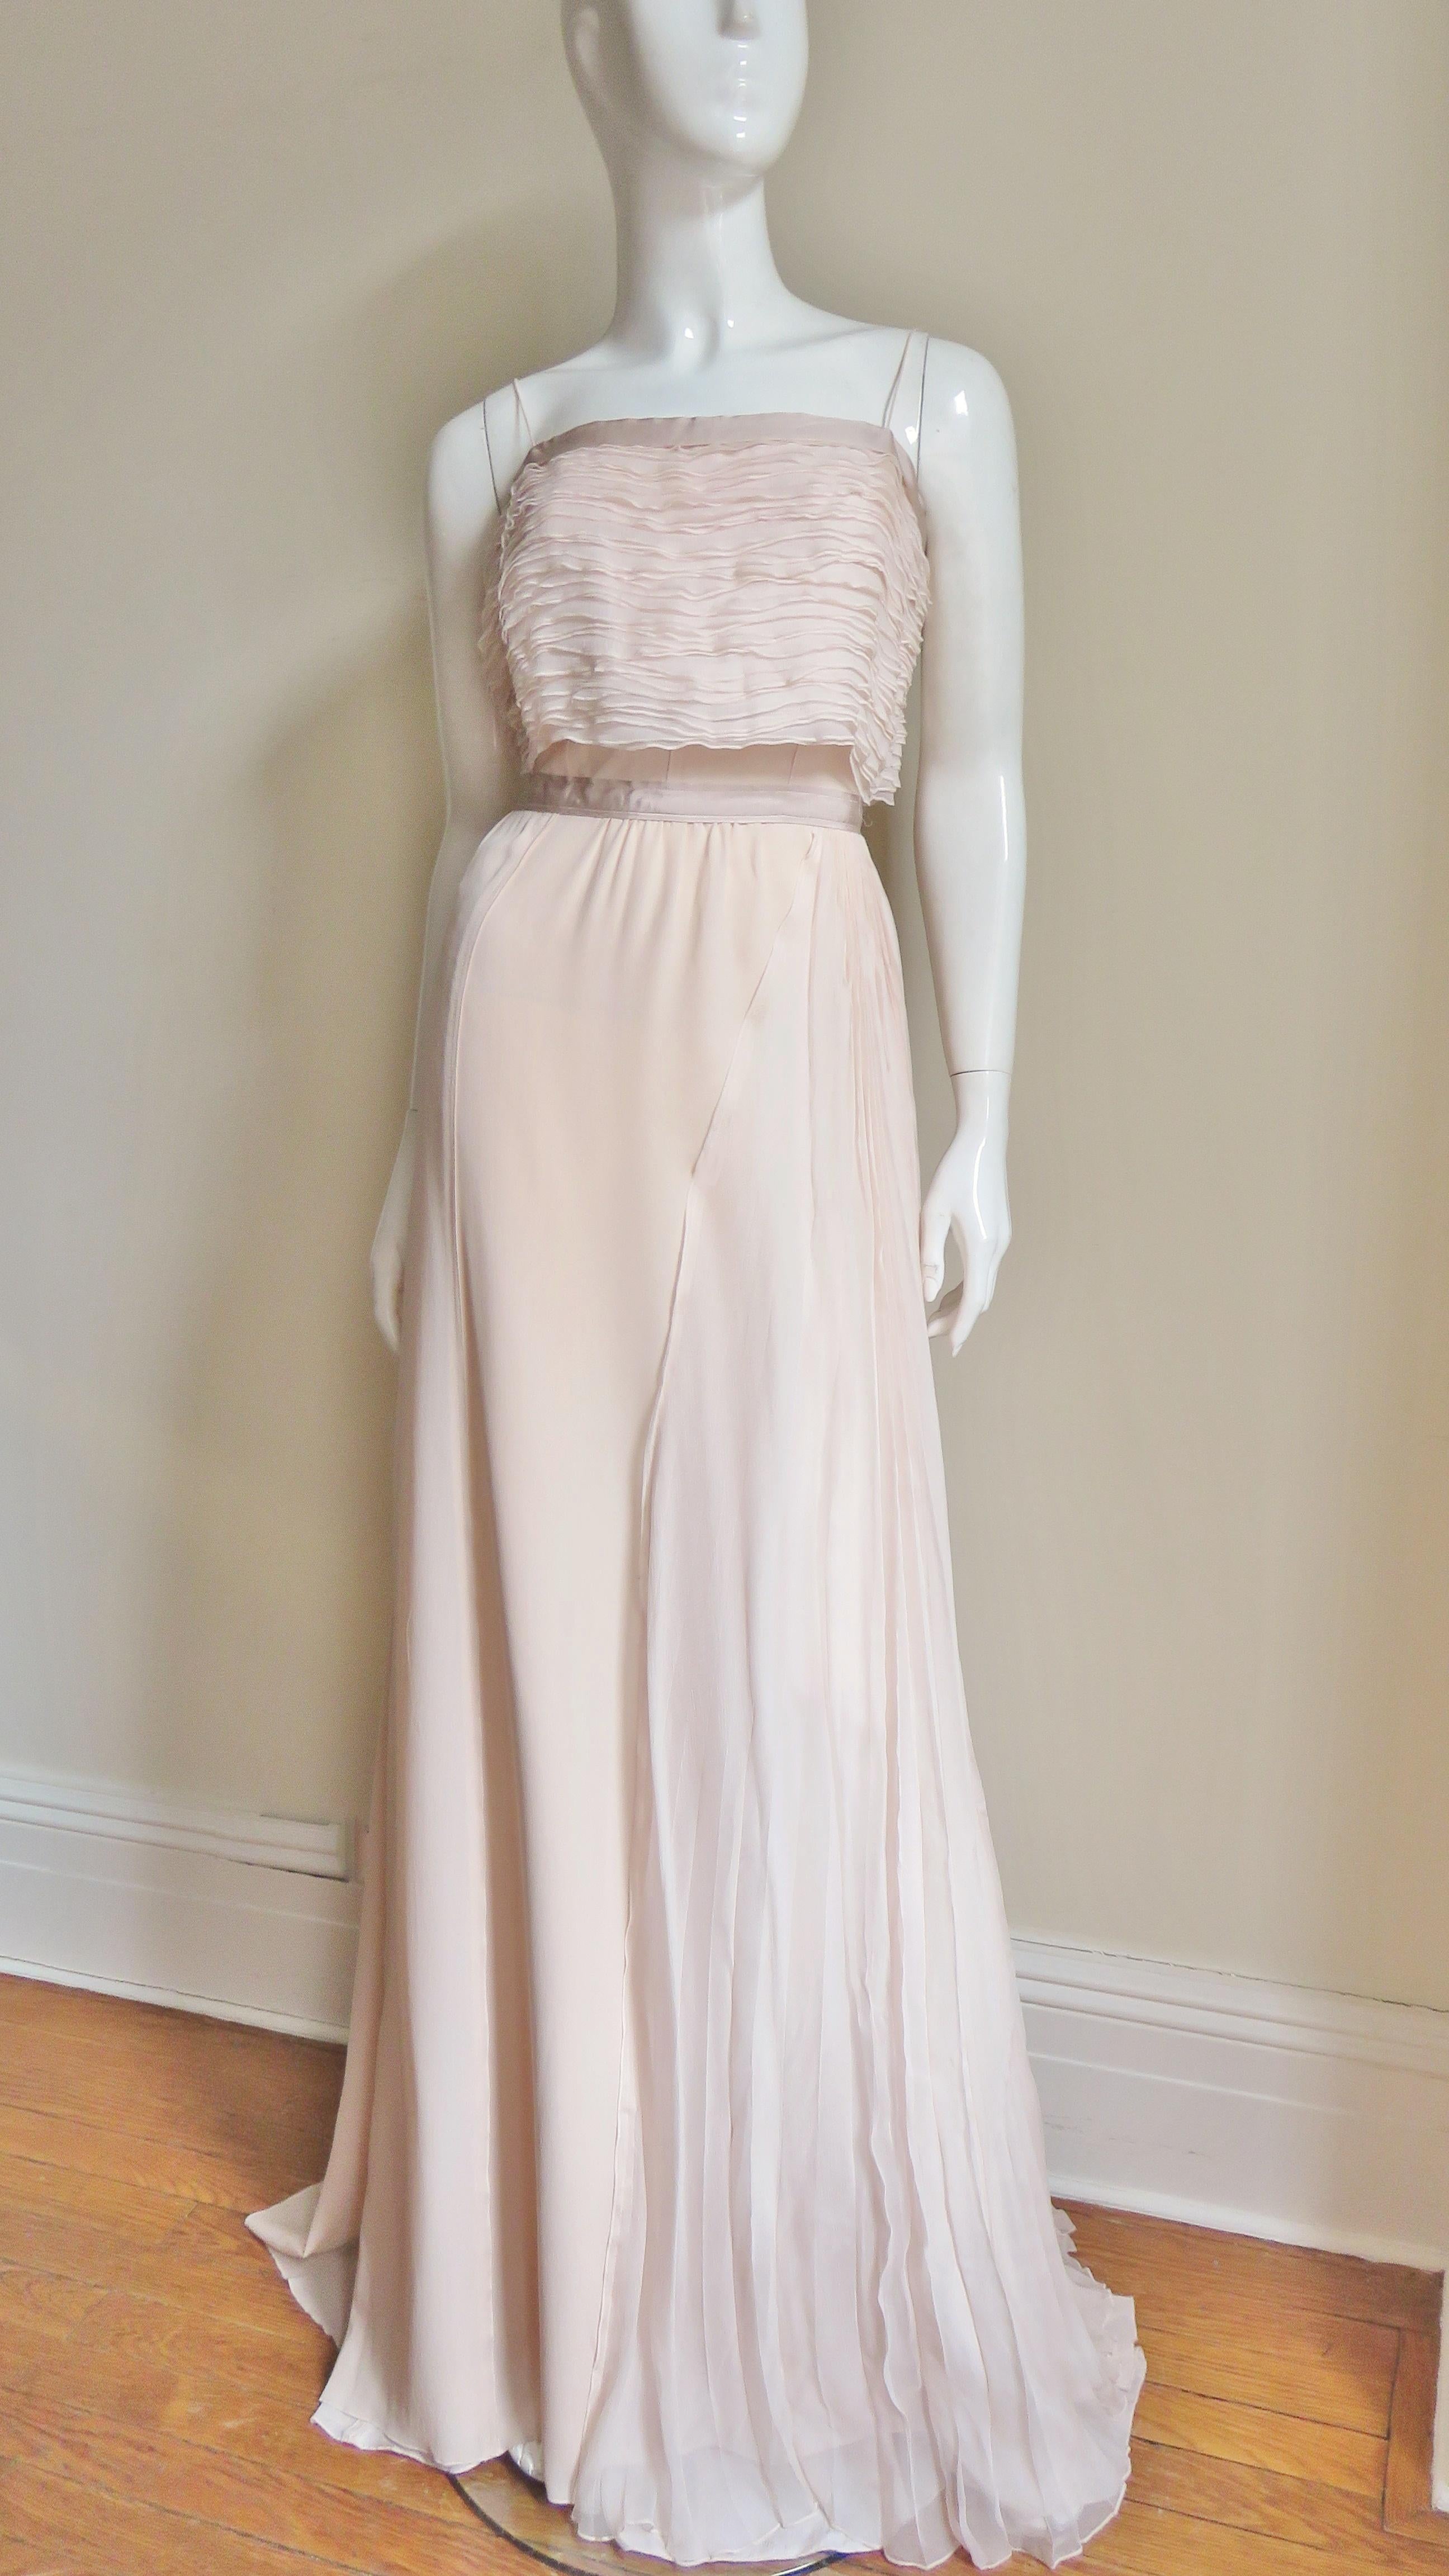 A exquisite delicate blush pink silk chiffon and silk crepe gown from Nina Ricci.  The bodice has spaghetti straps and layer upon layer of individually finished horizontal rows of silk chiffon. There is matching silk grosgrain around the the top of